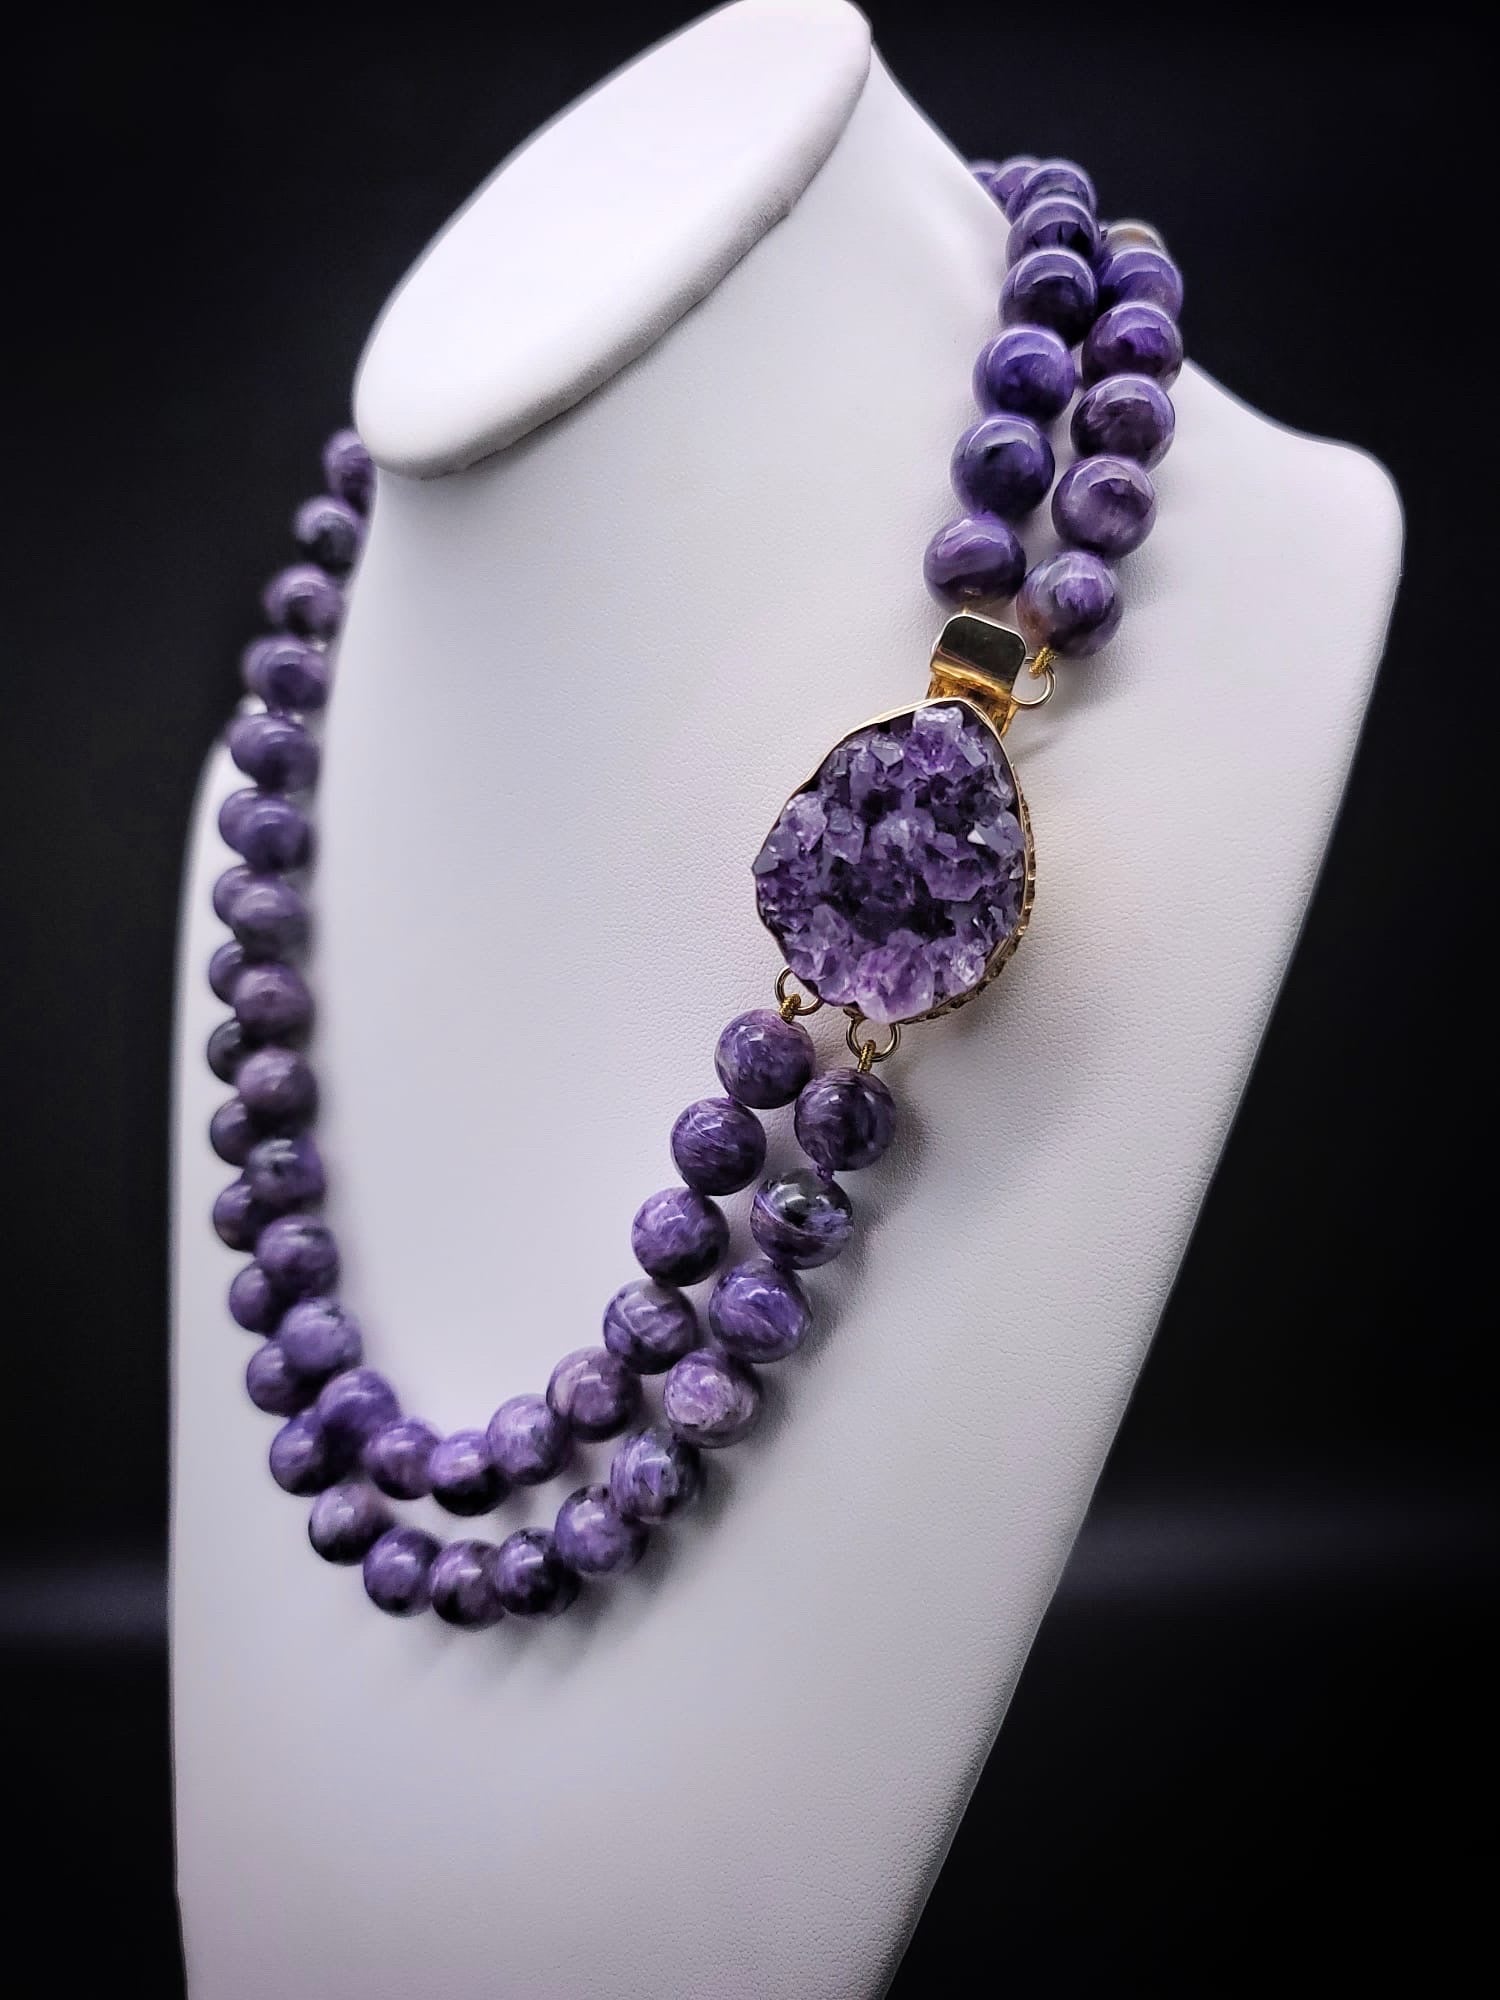 One-of-a-Kind
The perfect purple necklace. Charoite is a relatively recent discovery (1978) is a beautiful purple stone found only in Siberia.The perfectly matched set of beads clasped by a unique large amethyst Geo complimenting the rich purple of